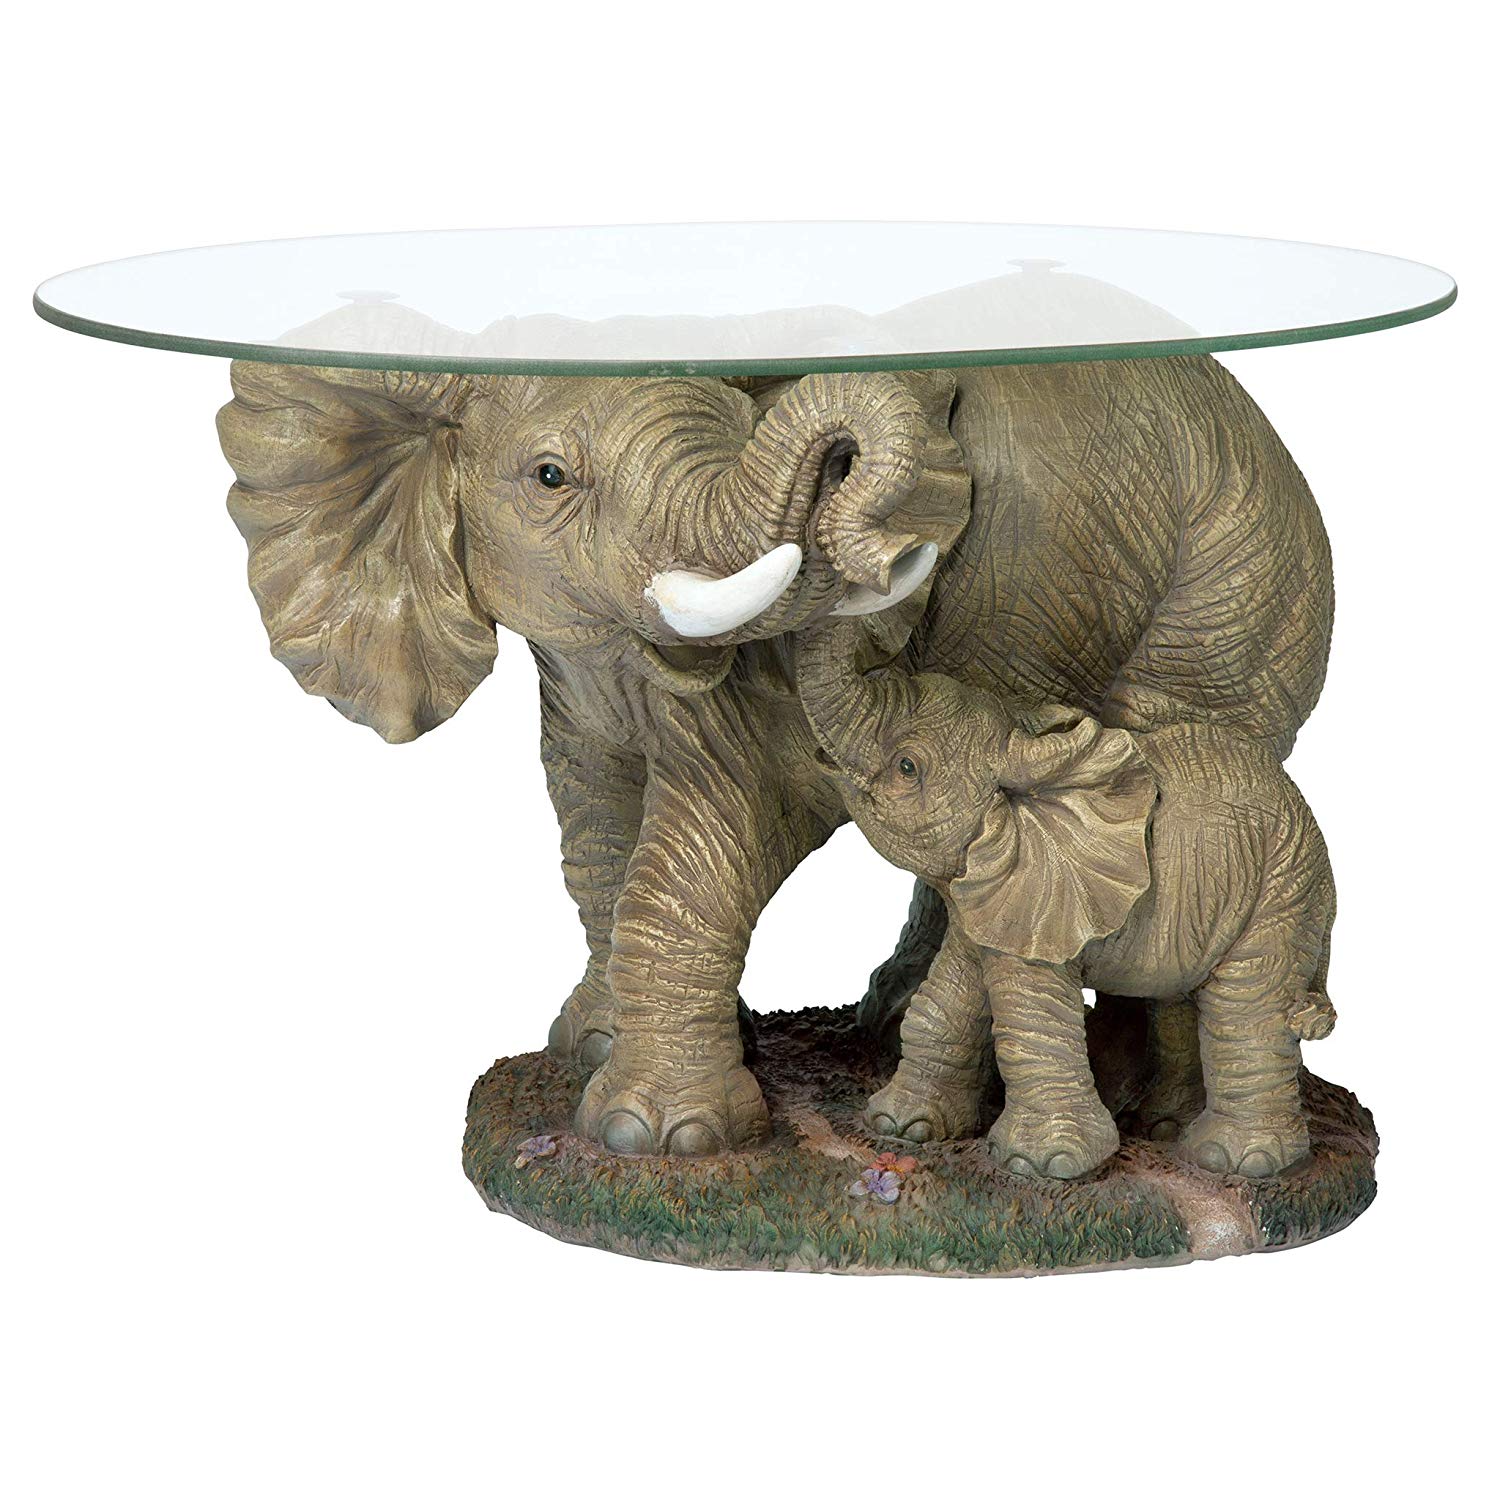 design toscano elephants majesty african decor coffee elephant side table with glass top inch polyresin full color kitchen dining small antique oak easy nightstand plans living